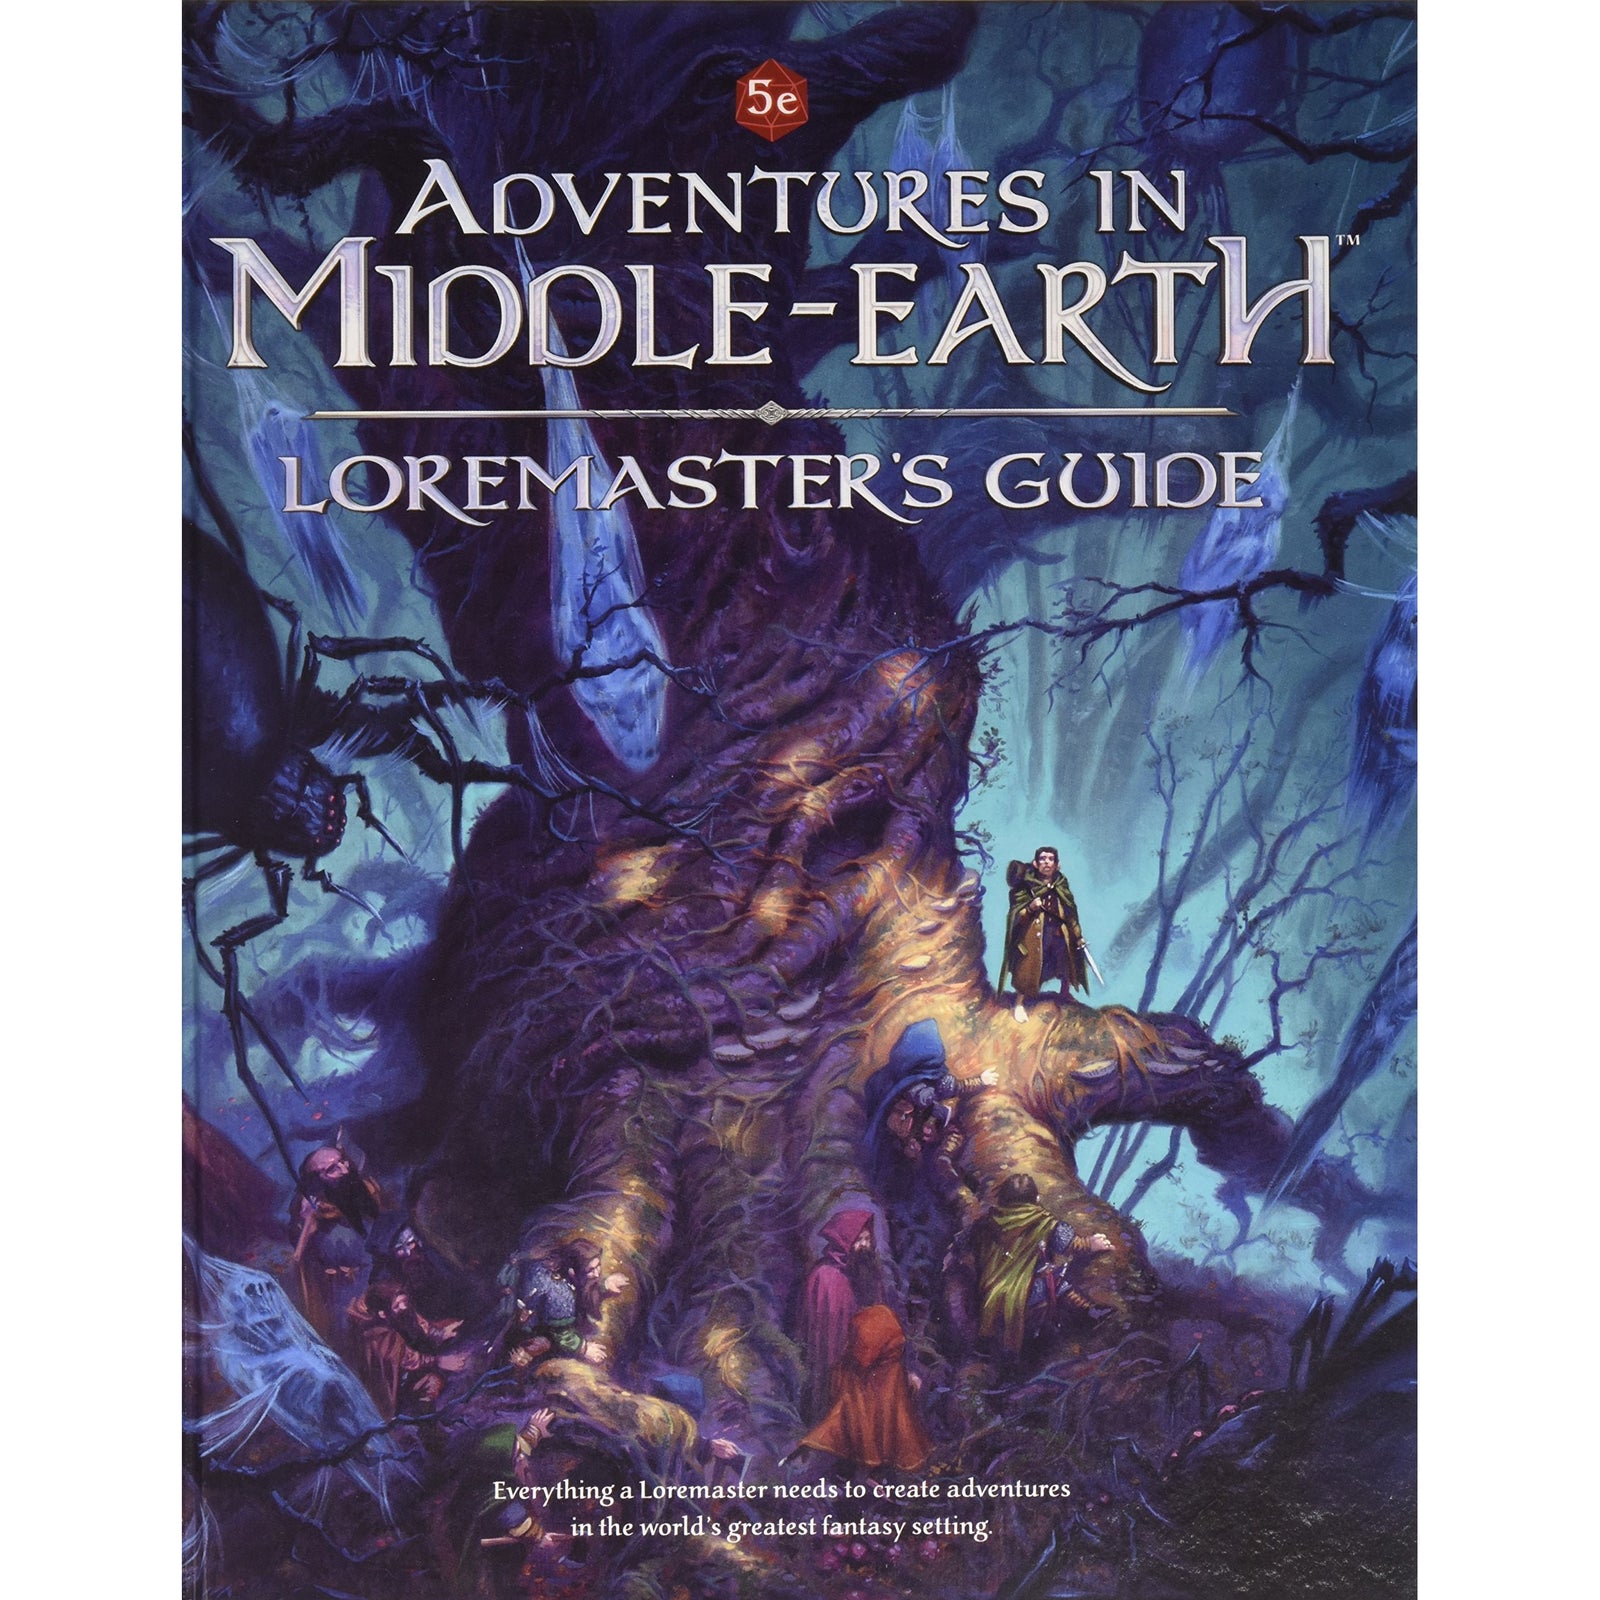 Adventures in Middle-Earth Lore Master's Guide